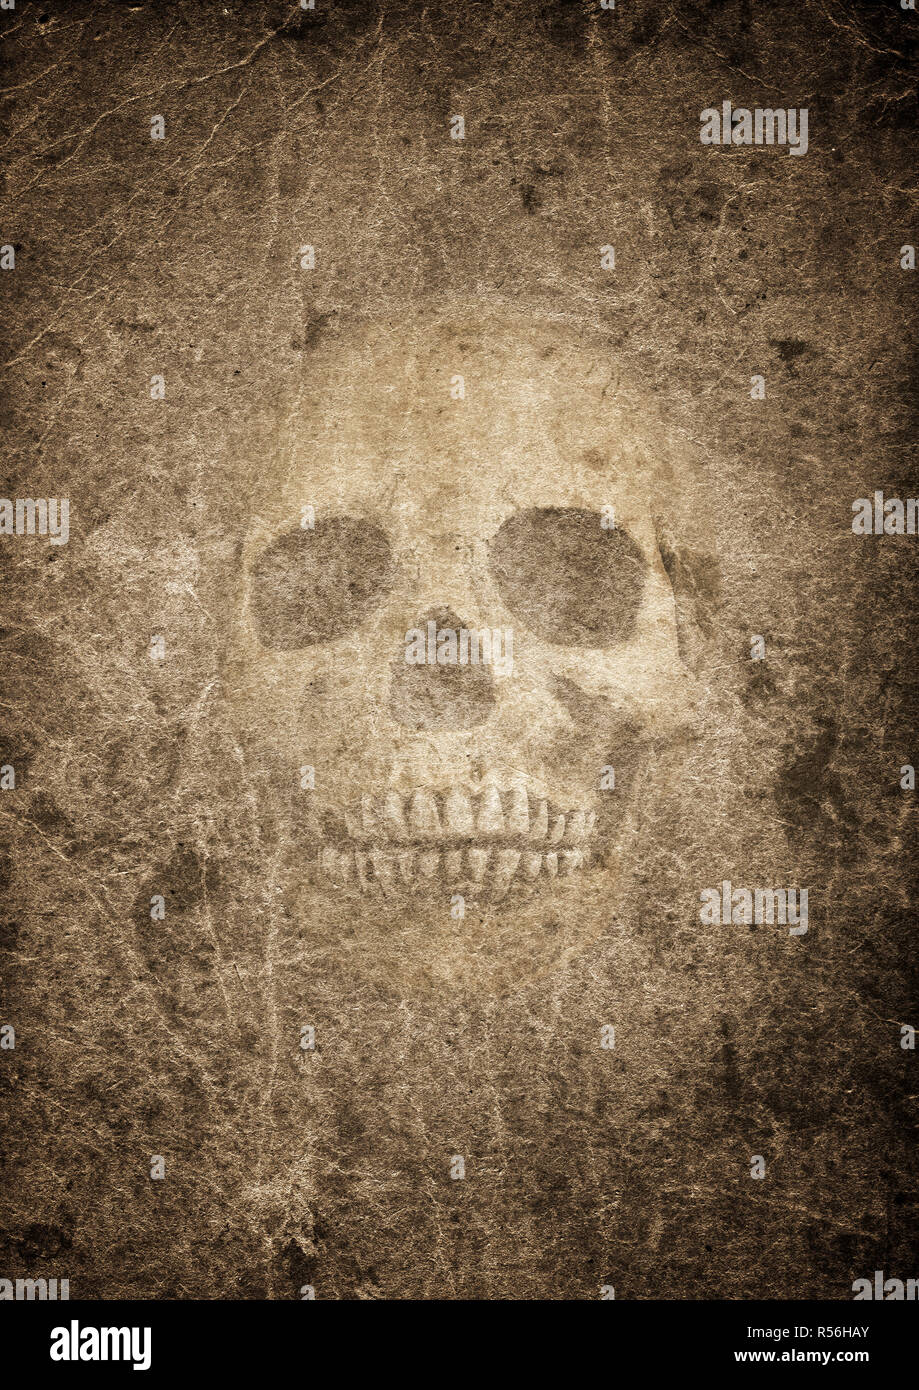 Very old burnt grunge textured paper with human skull Stock Photo